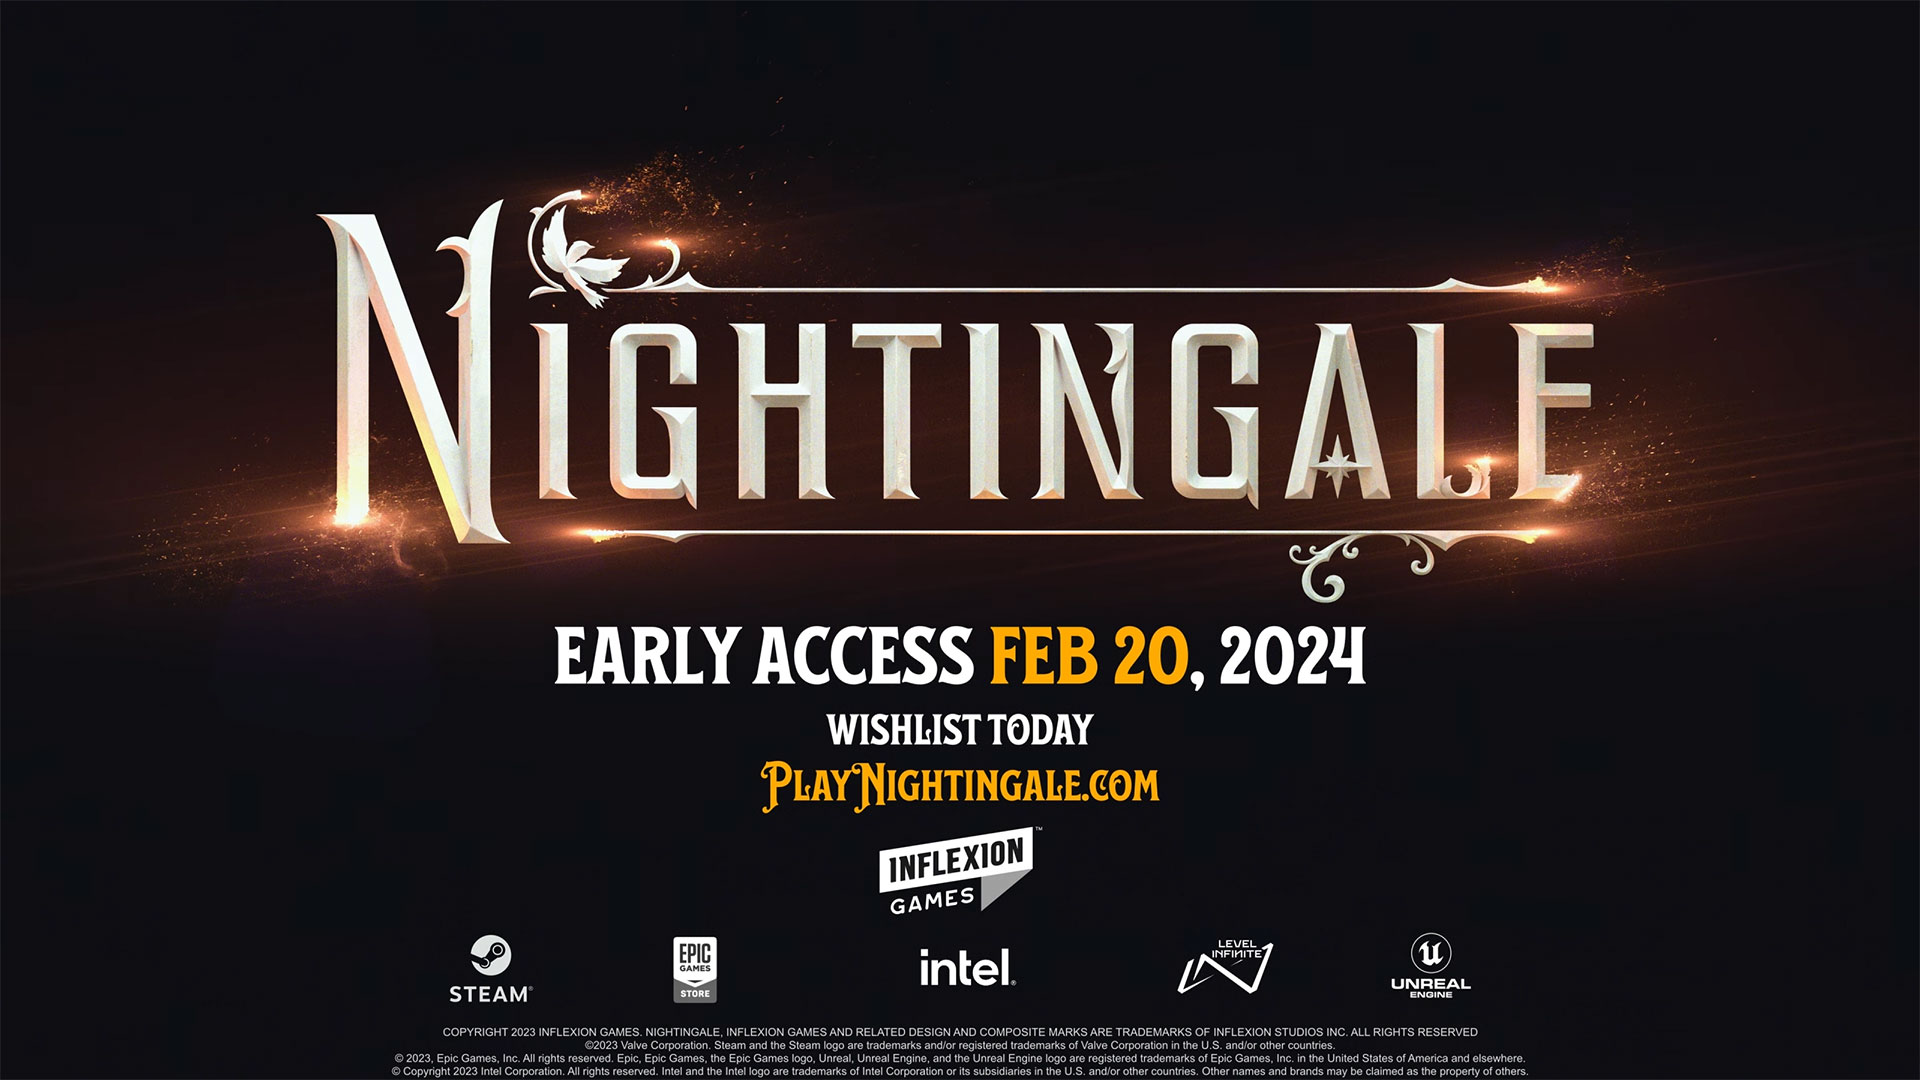 Nightingale is now launching into Early Access on February 20